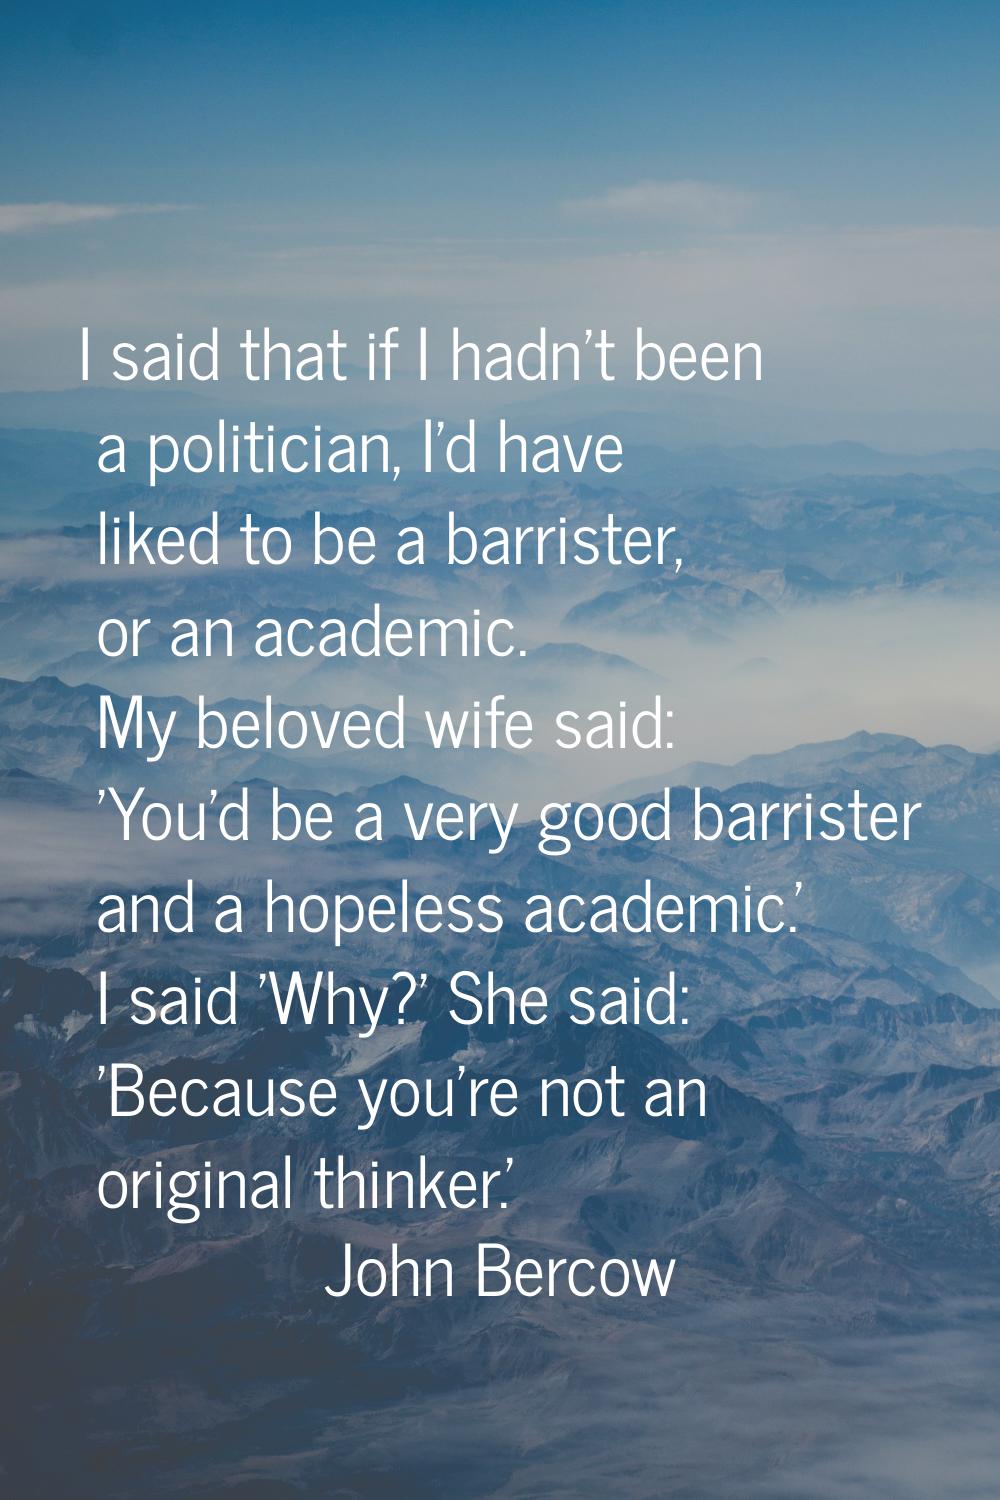 I said that if I hadn't been a politician, I'd have liked to be a barrister, or an academic. My bel